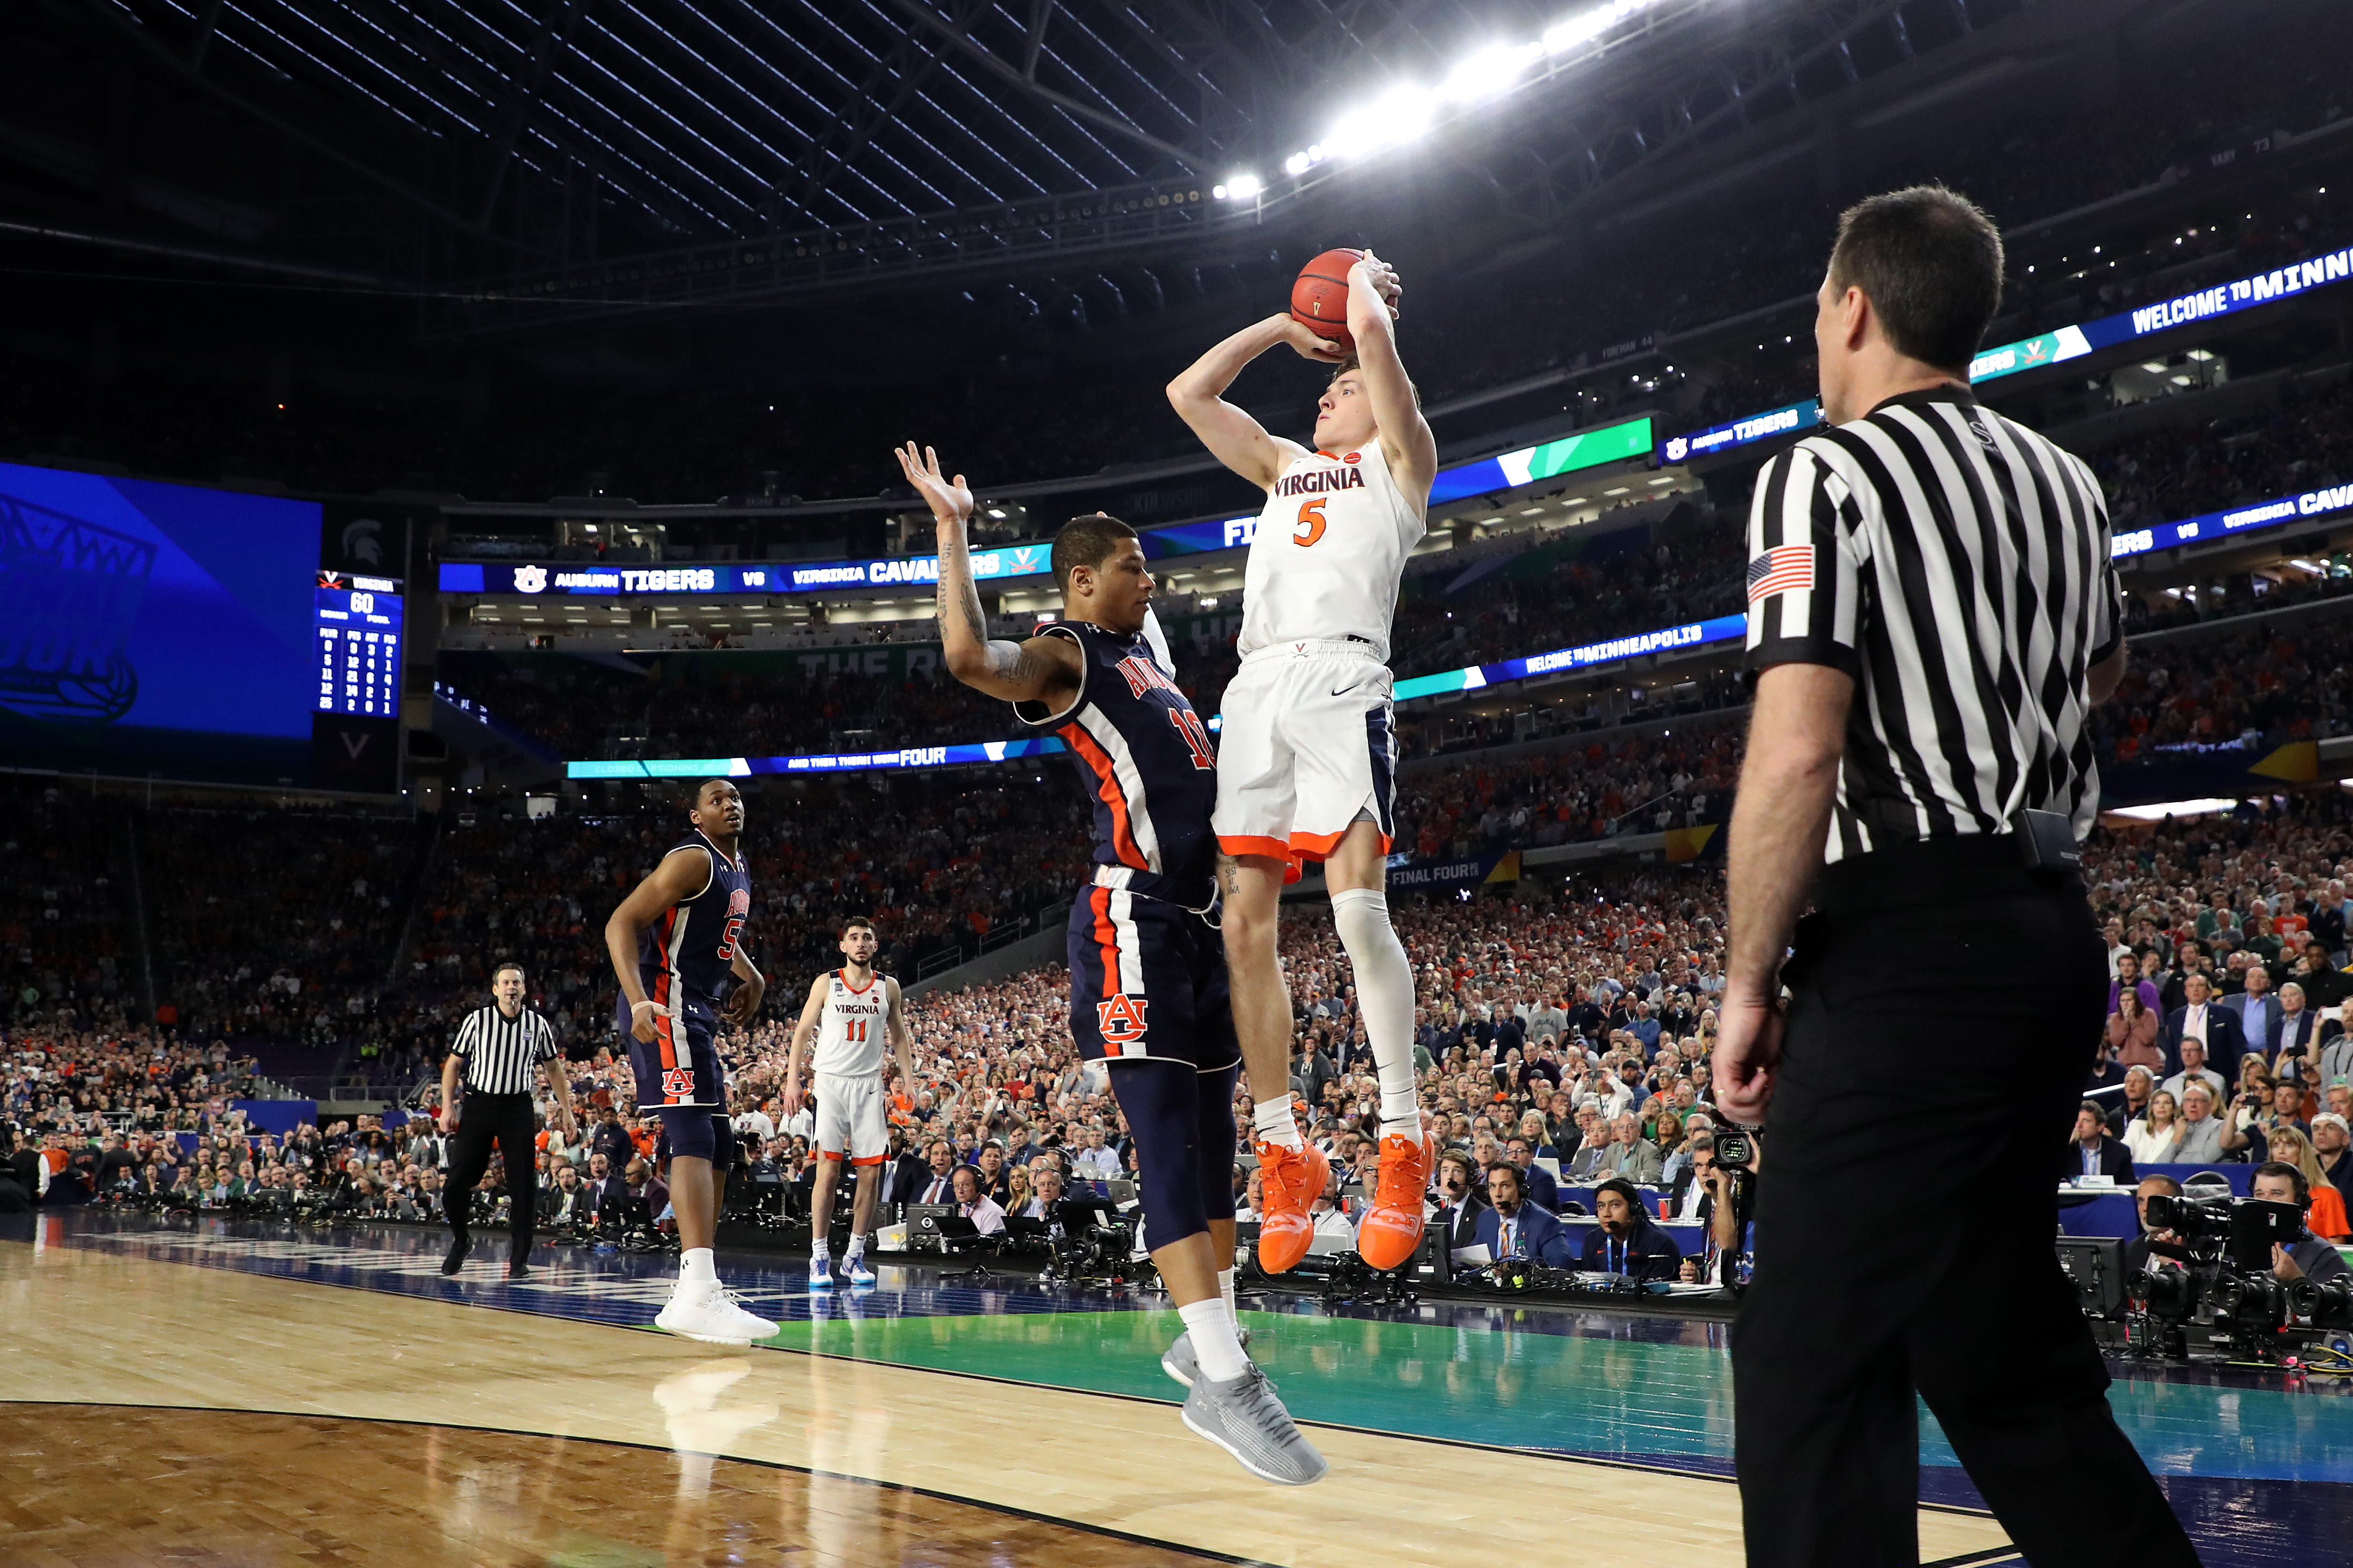 Highlight: Virginia's Kyle Guy gets fouled on game-winning three point attempt